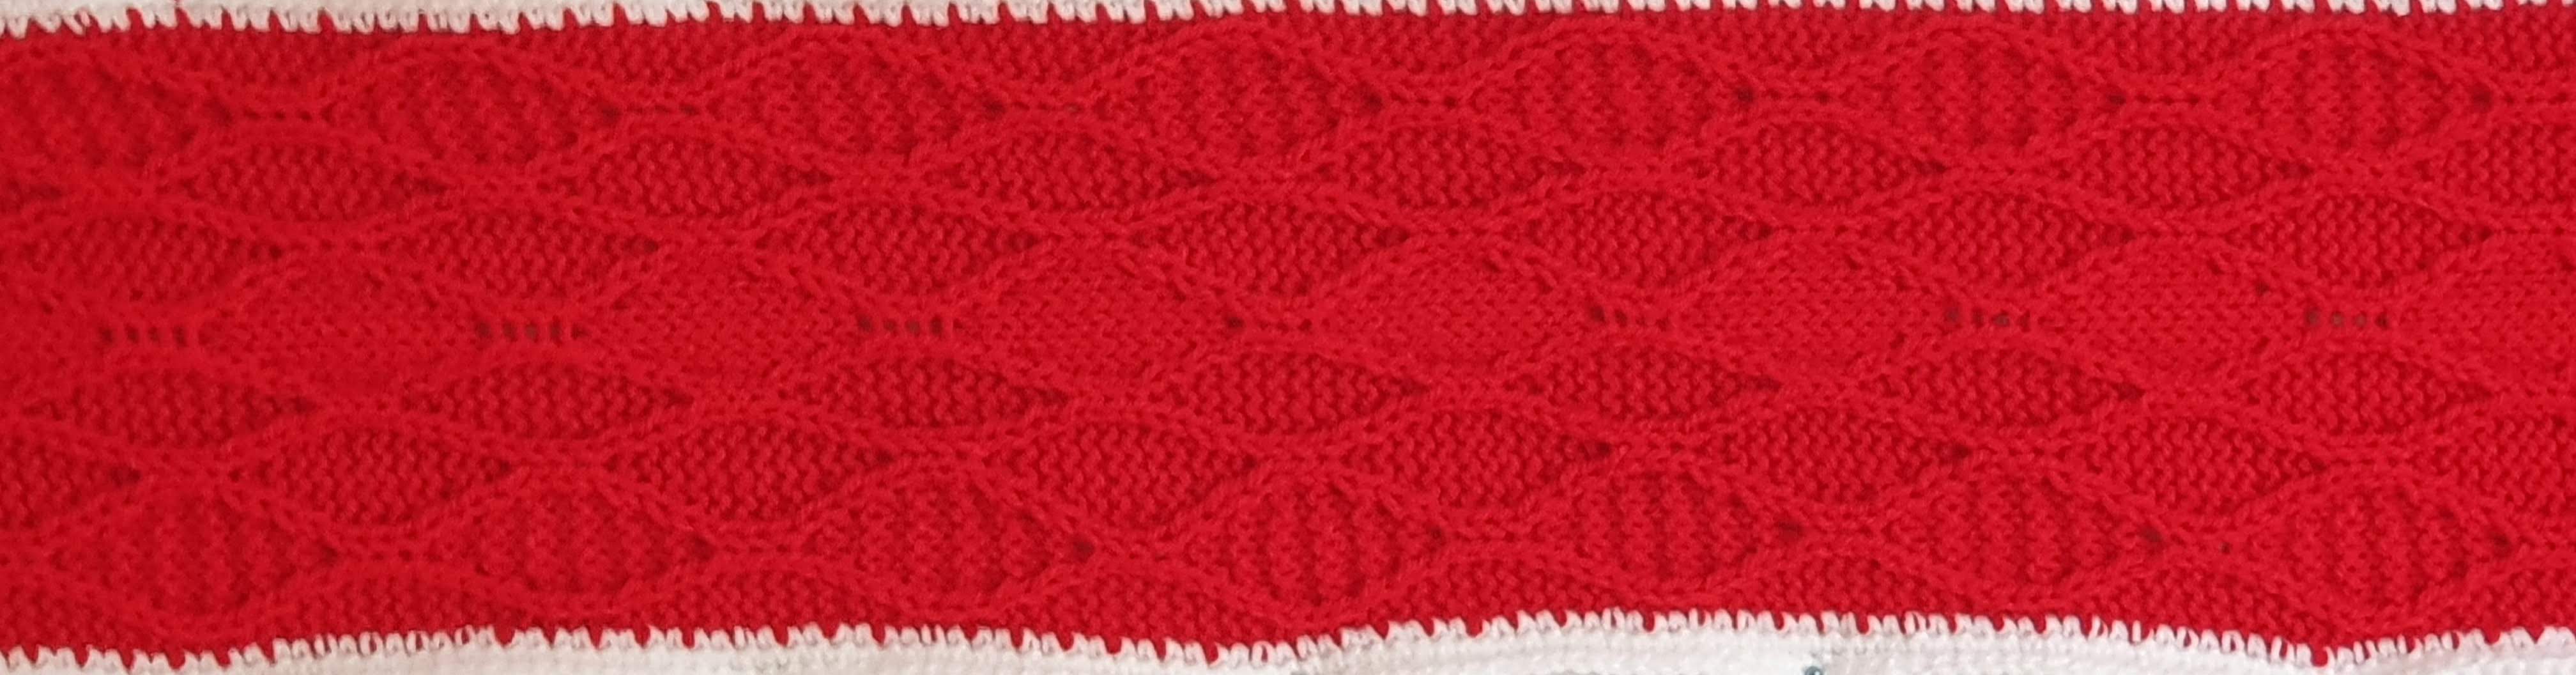 Red scarf with textured diamonds